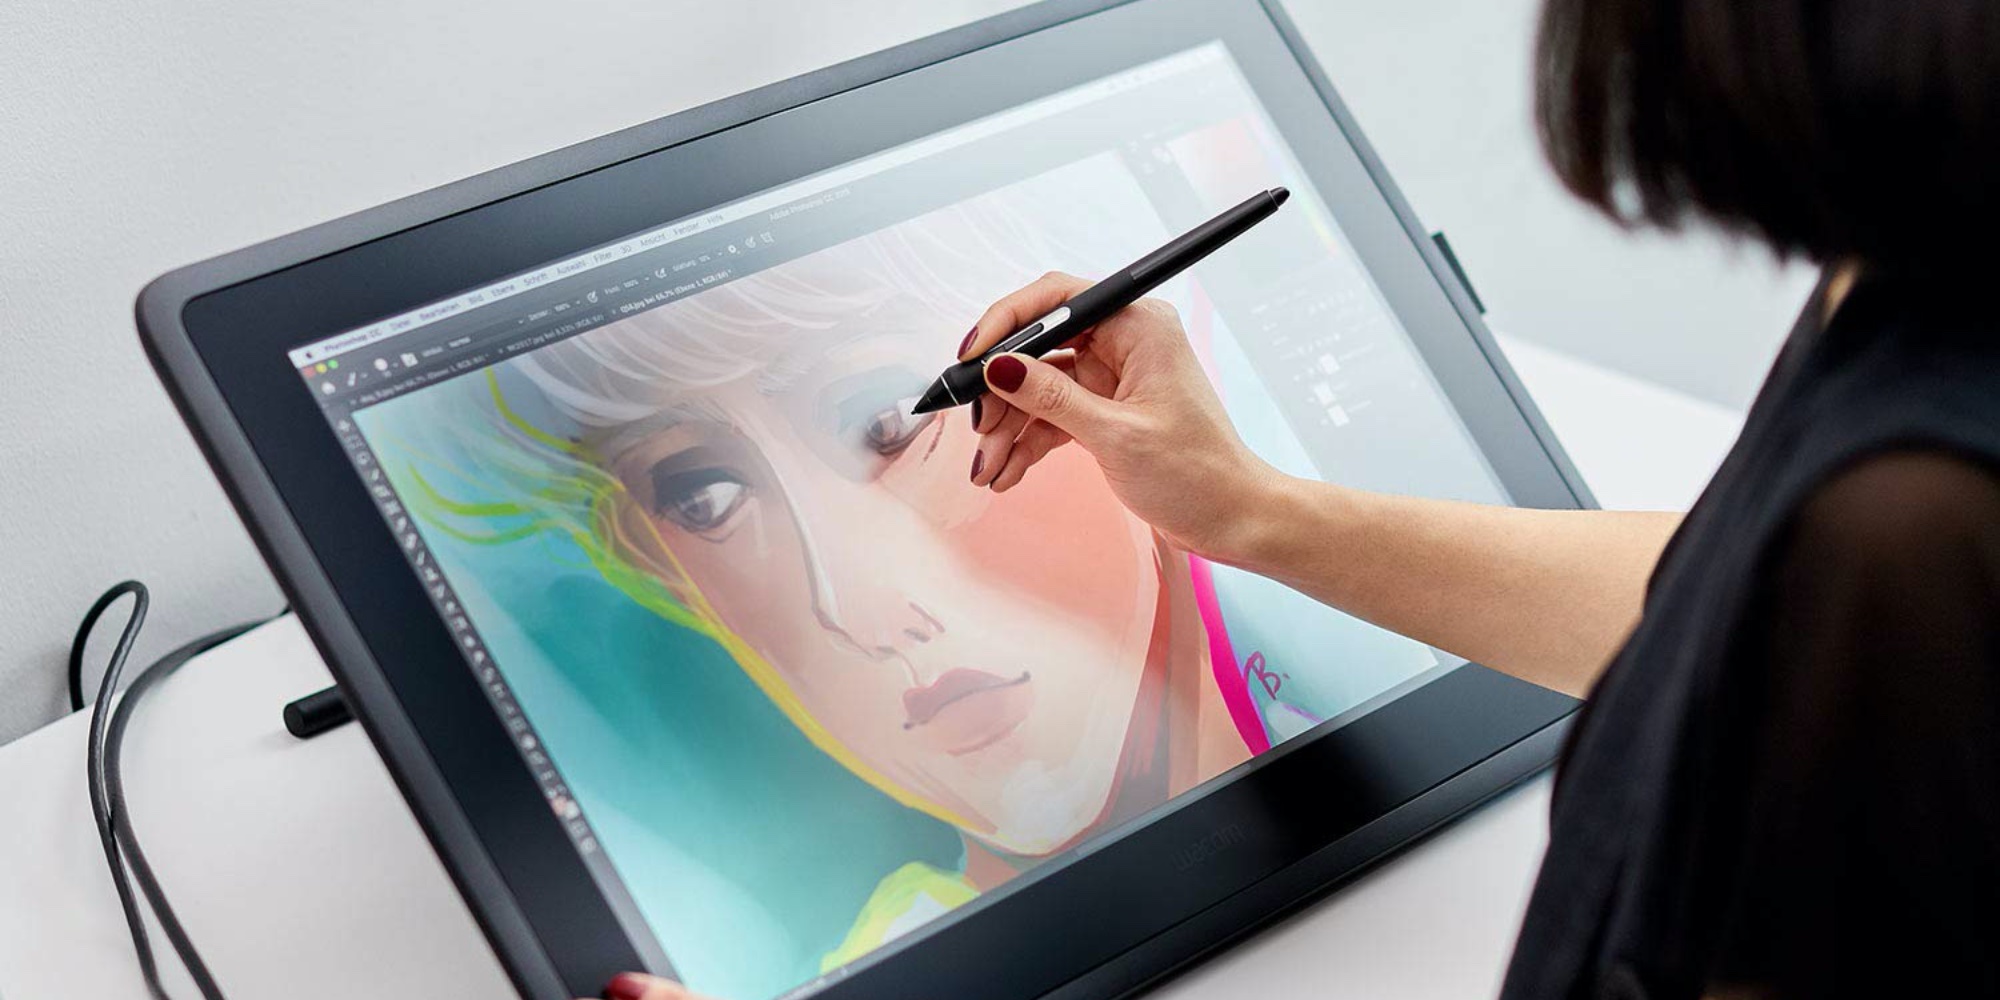 best drawing program for mac and wacom